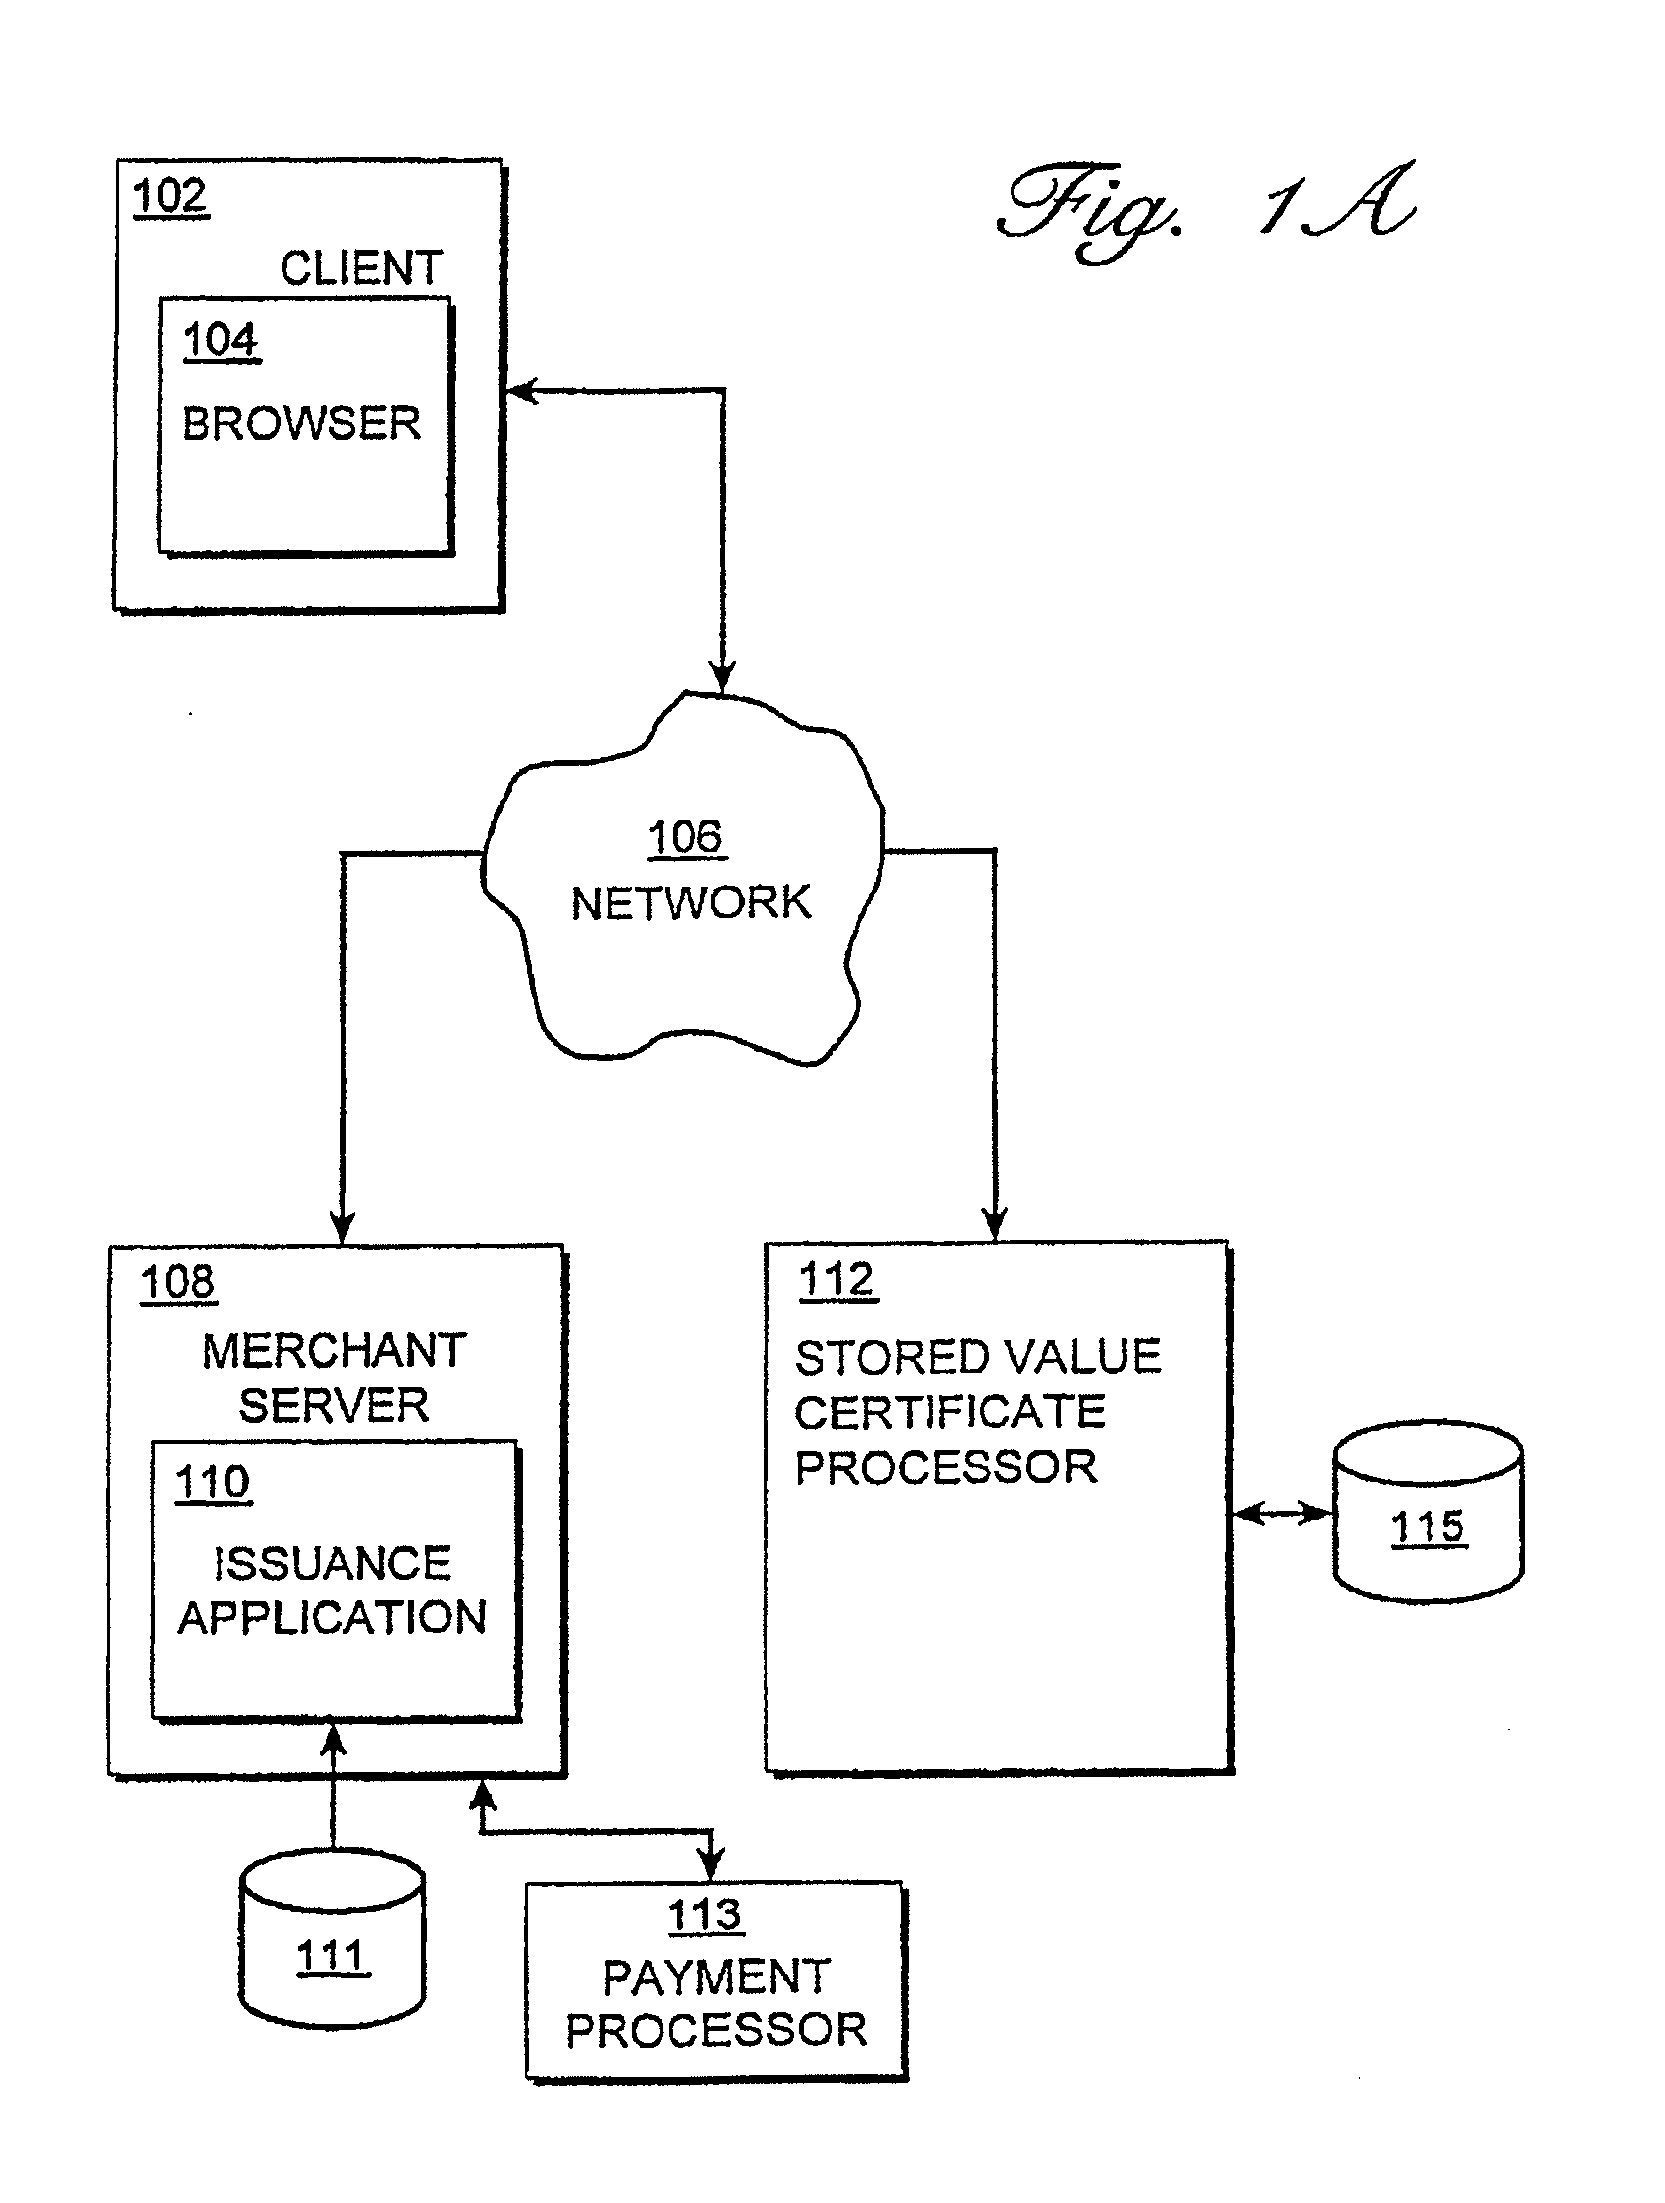 Stored value electronic certificate processing